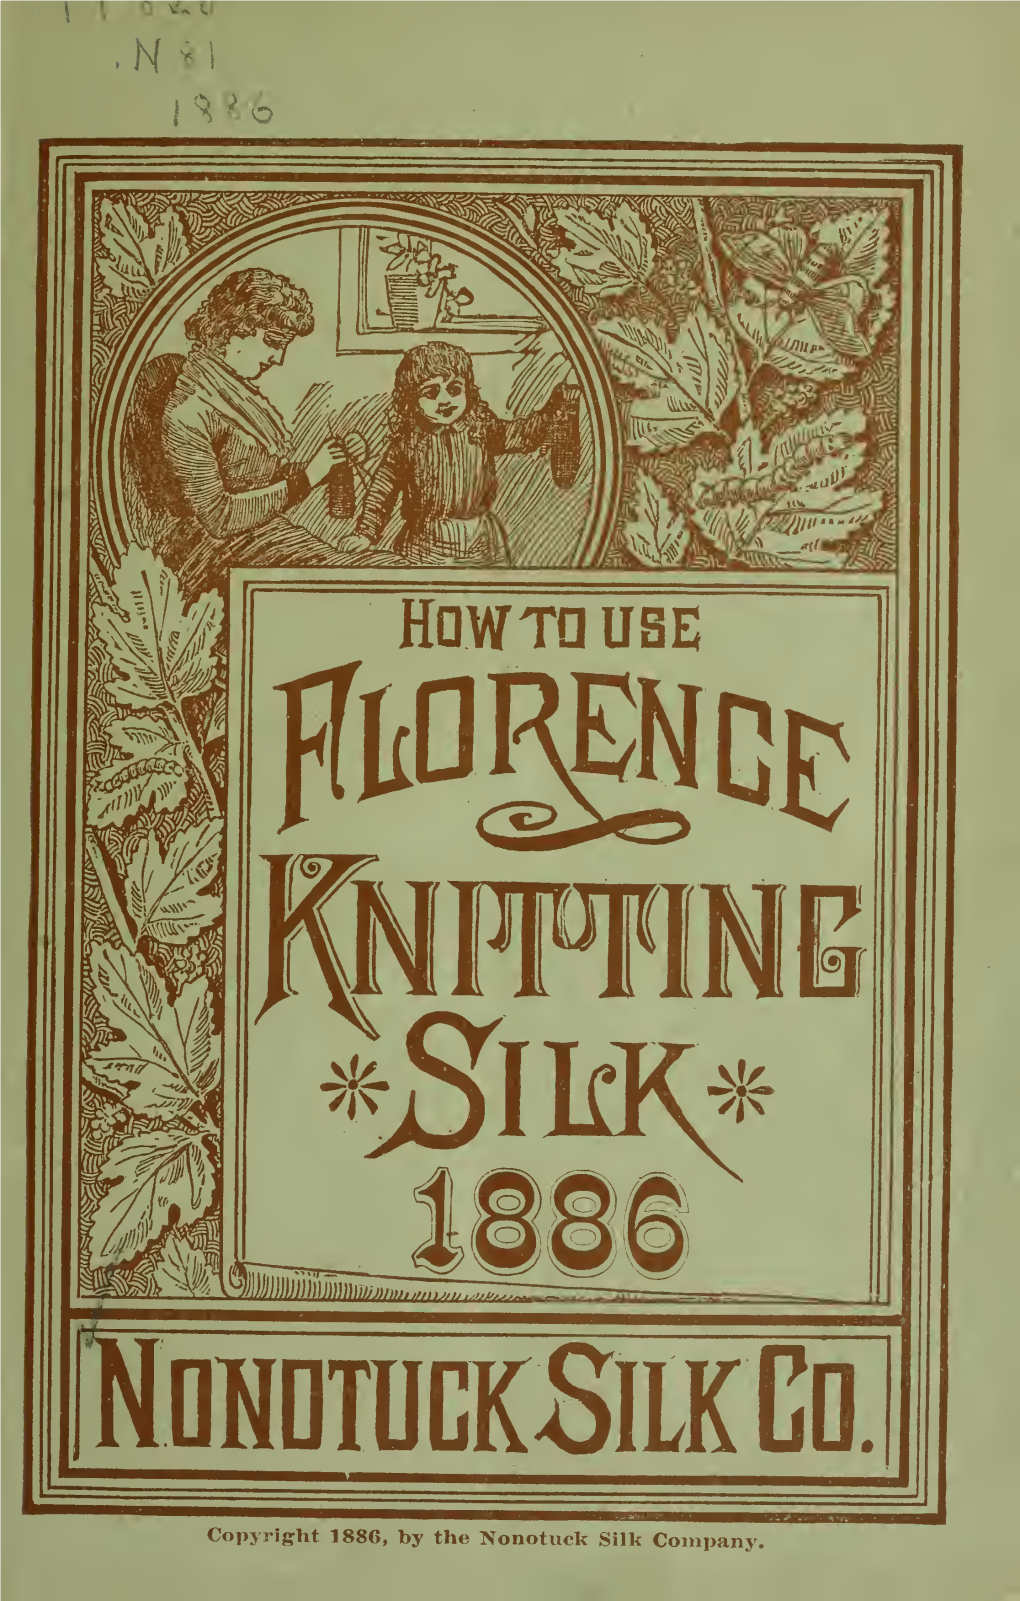 How to Use Florence Knitting Silk